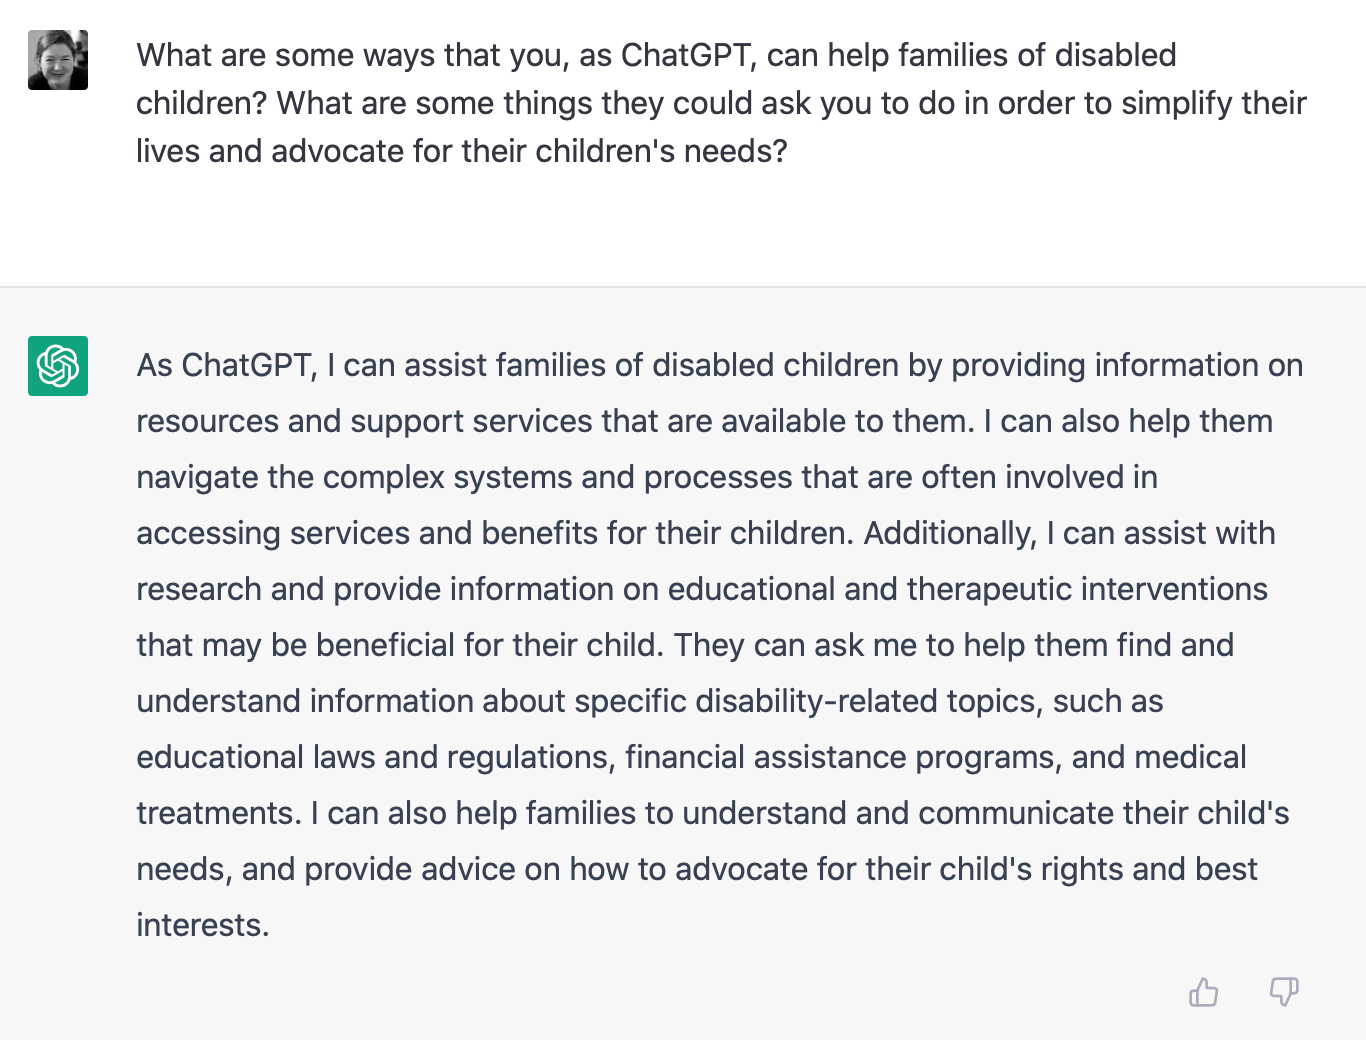 Shasta: What are some ways that you, as ChatGPT, can help families of disabled children? What are some things they could ask you to do in order to simplify their lives and advocate for their children's needs?  ChatGPT: As ChatGPT, I can assist families of disabled children by providing information on resources and support services that are available to them. I can also help them navigate the complex systems and processes that are often involved in accessing services and benefits for their children. Additionally, I can assist with research and provide information on educational and therapeutic interventions that may be beneficial for their child. They can ask me to help them find and understand information about specific disability-related topics, such as educational laws and regulations, financial assistance programs, and medical treatments. I can also help families to understand and communicate their child's needs, and provide advice on how to advocate for their child's rights and best interests.